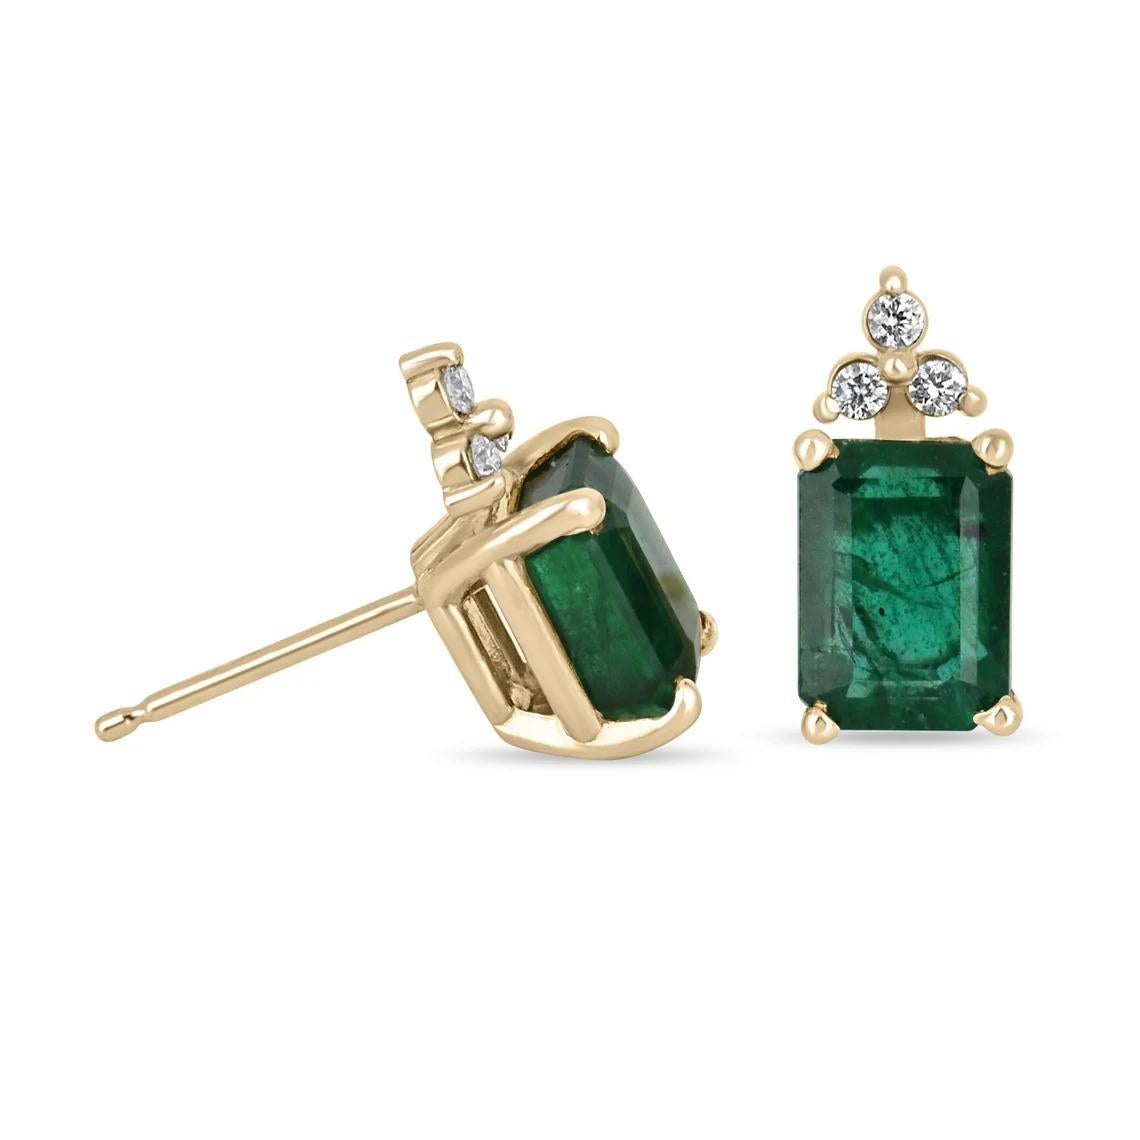 Elegance defined! These emerald and diamond earrings are fashioned in solid 14k yellow gold. These studs feature natural emerald cut emeralds accented with natural white diamonds. The emeralds have a combined 3.08 total carat weight and a dark green